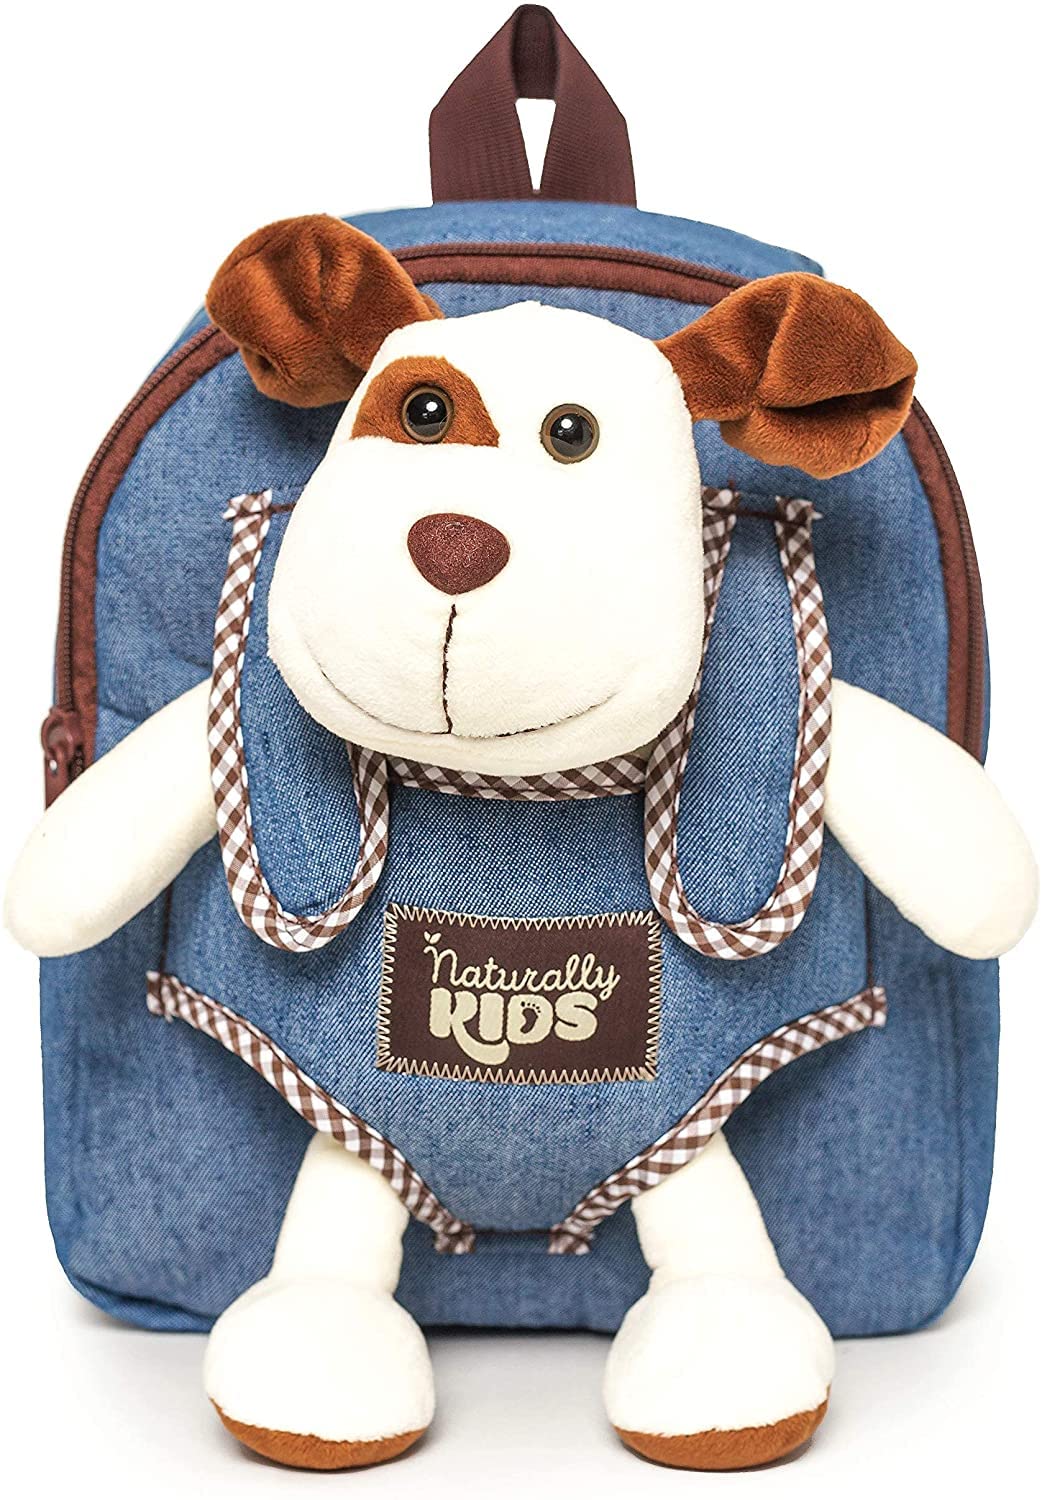 Naturally KIDS Small Backpack w Stuffed Animal Dog Plush Toy - Toddler Backpack for Boys Backpack for Kids - Toys for Kids Ages